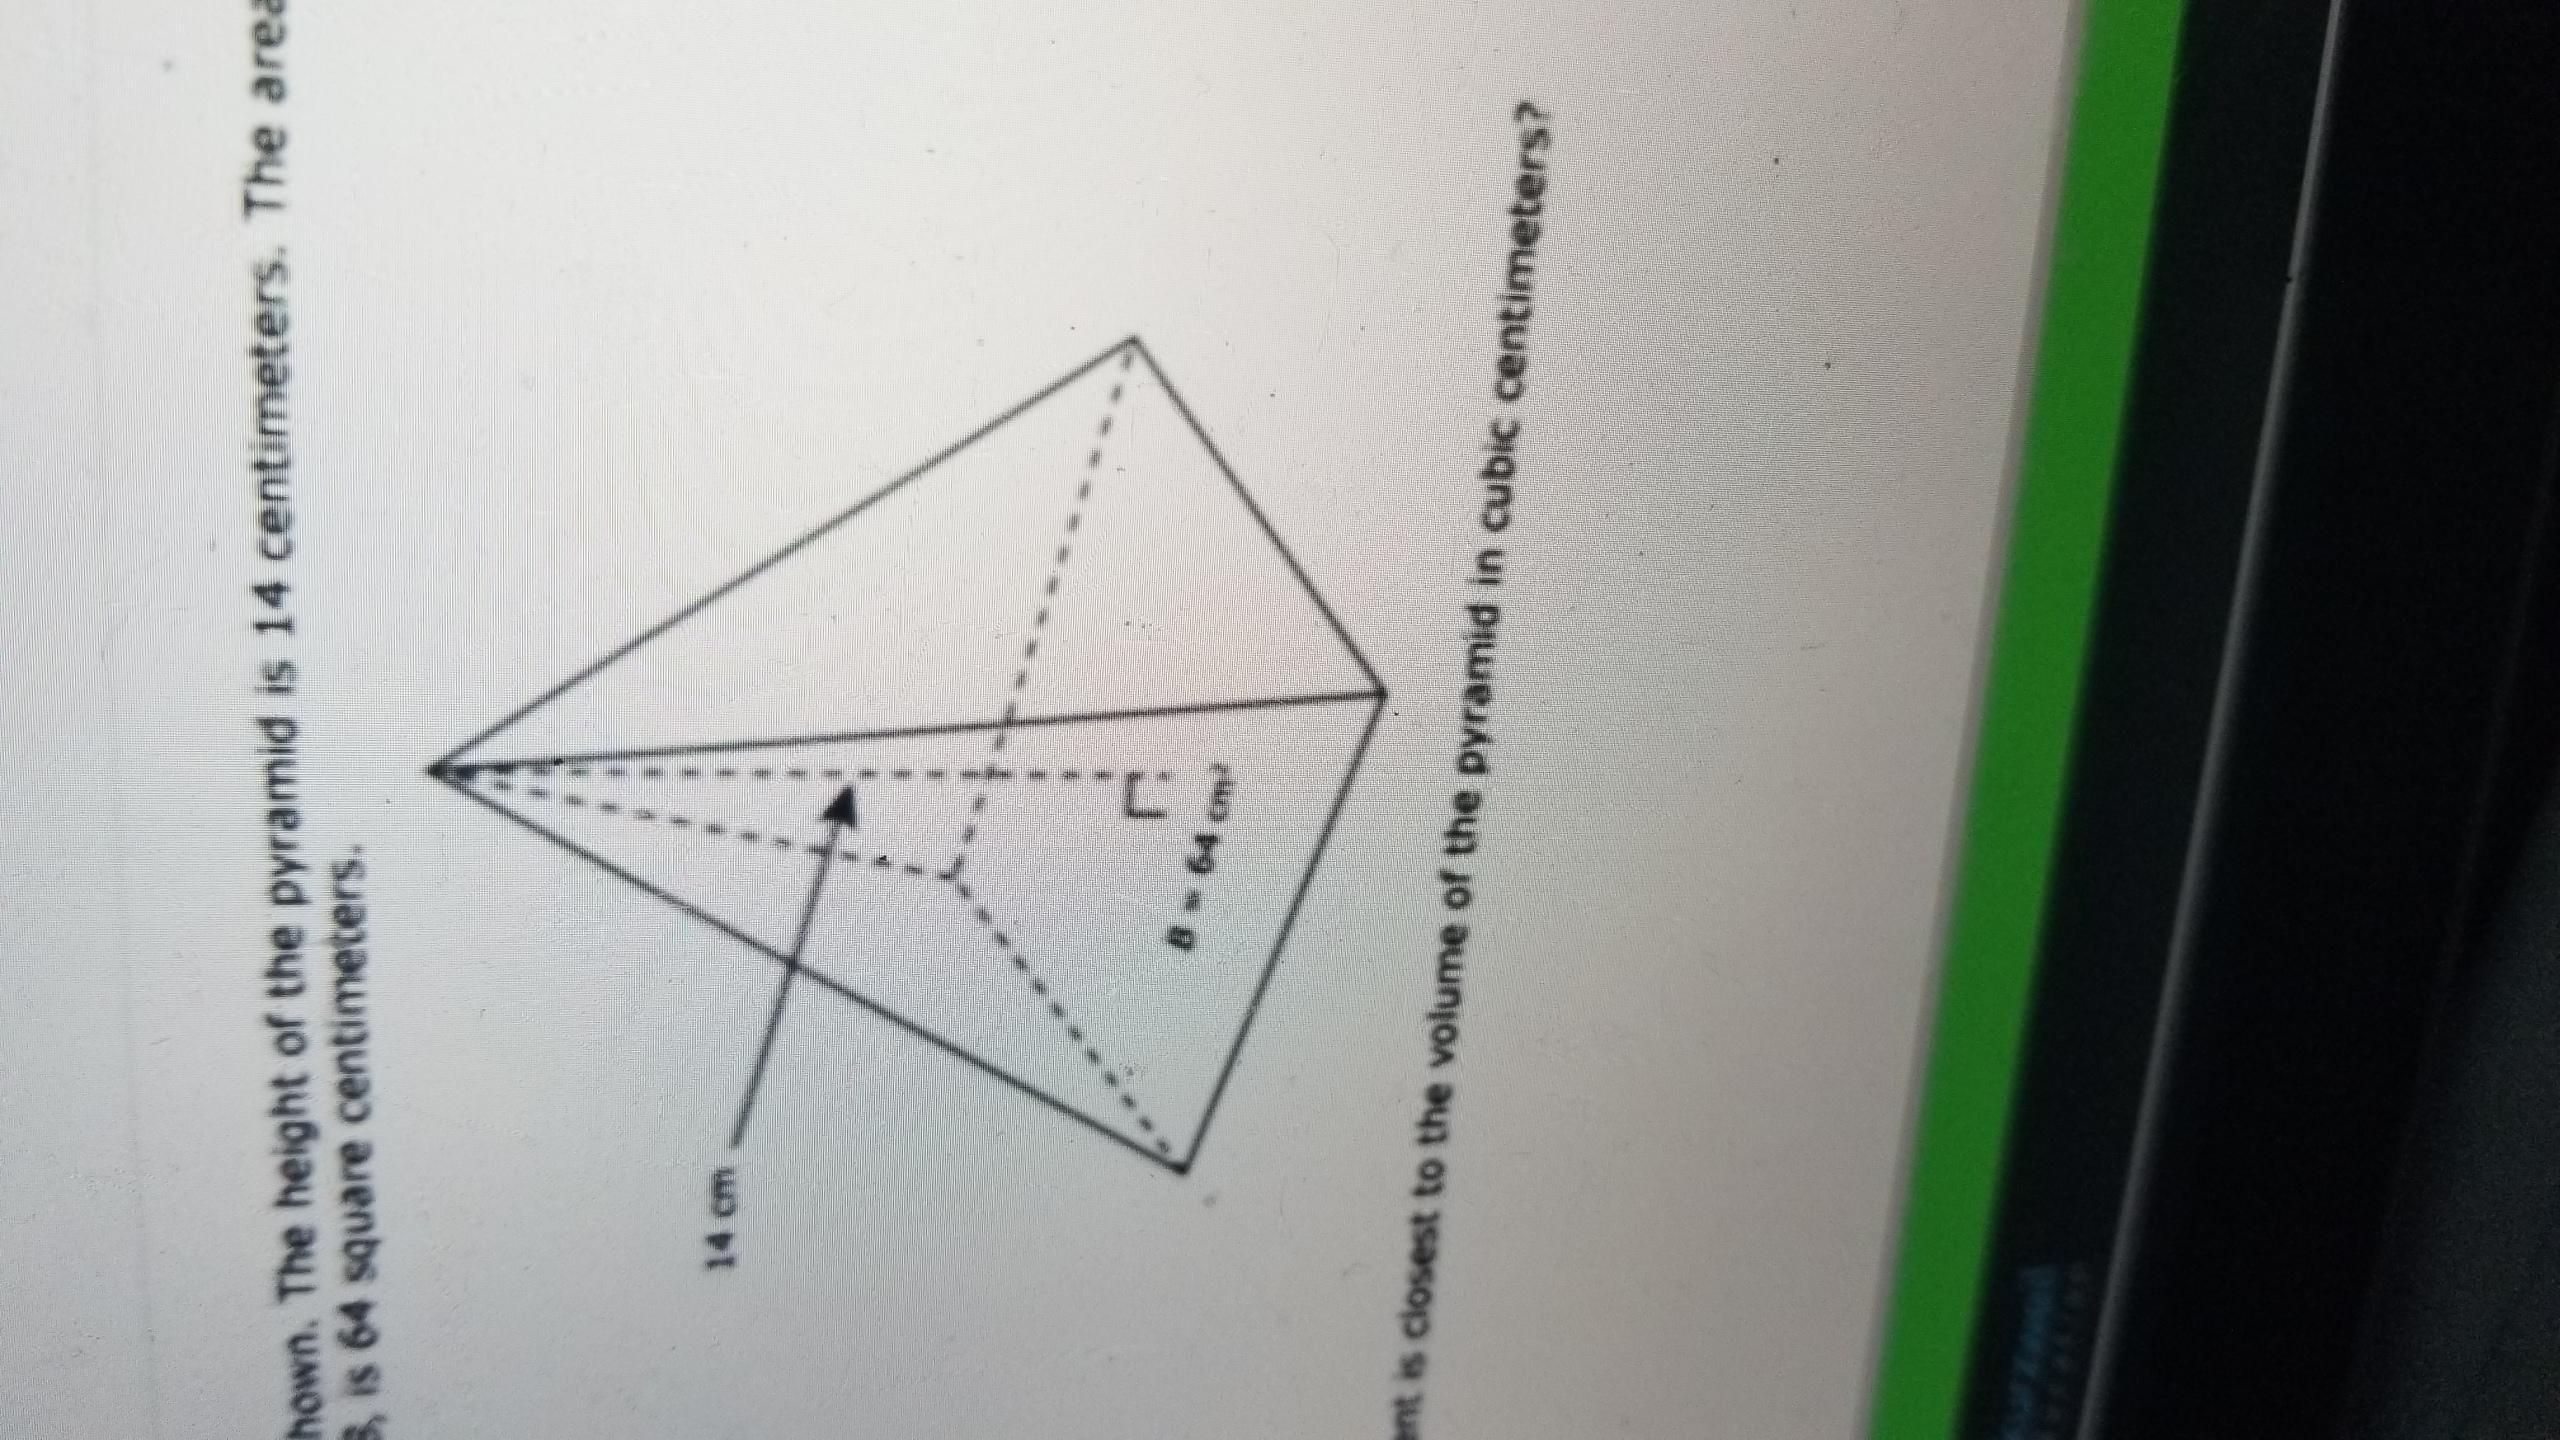 10. A Square Pyramid Is Shown. The Height Of The Pyramid Is 14 Centimeters. The Area Of The Base Of The